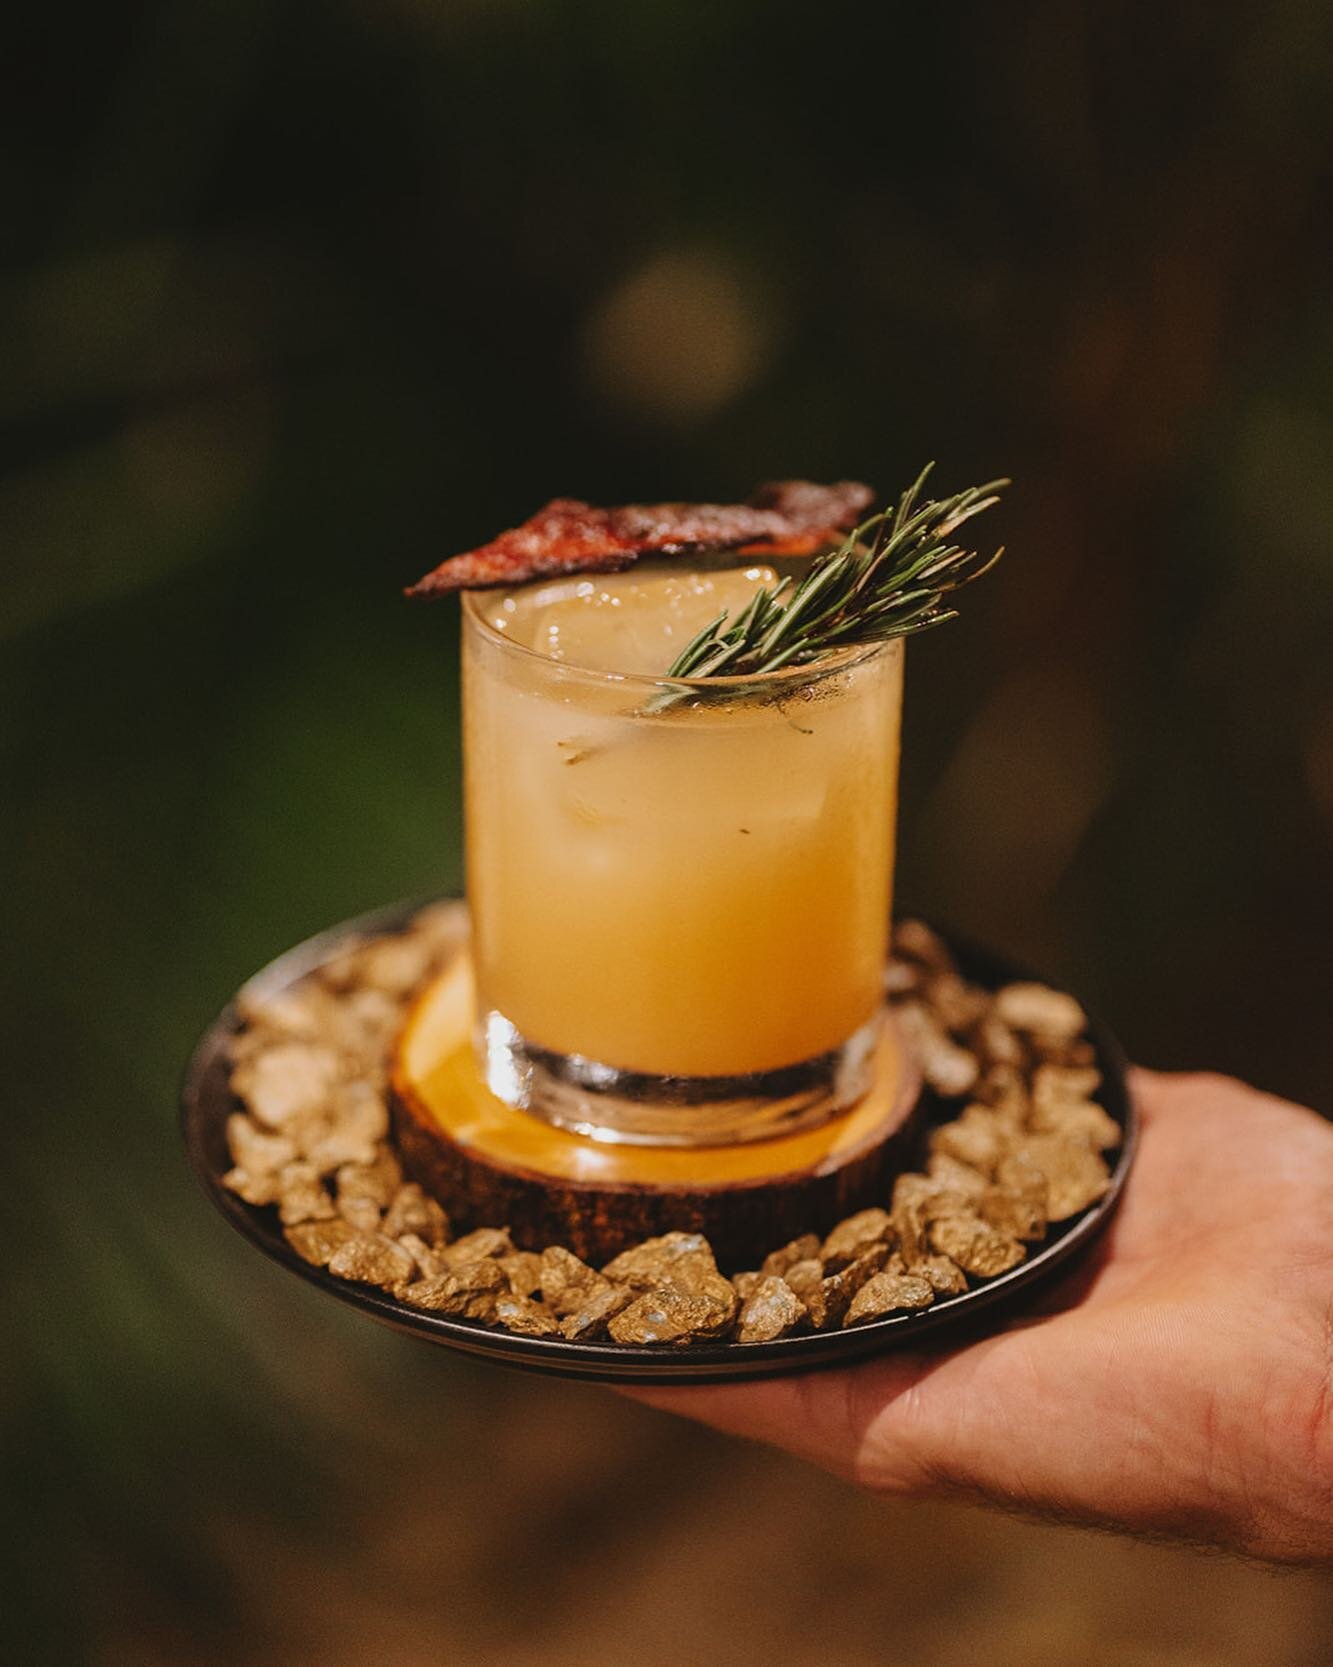 Greet the night with &ldquo;Tiger eye&rdquo; crafted with the finest ingredients into a cocktail masterpiece 🌶️